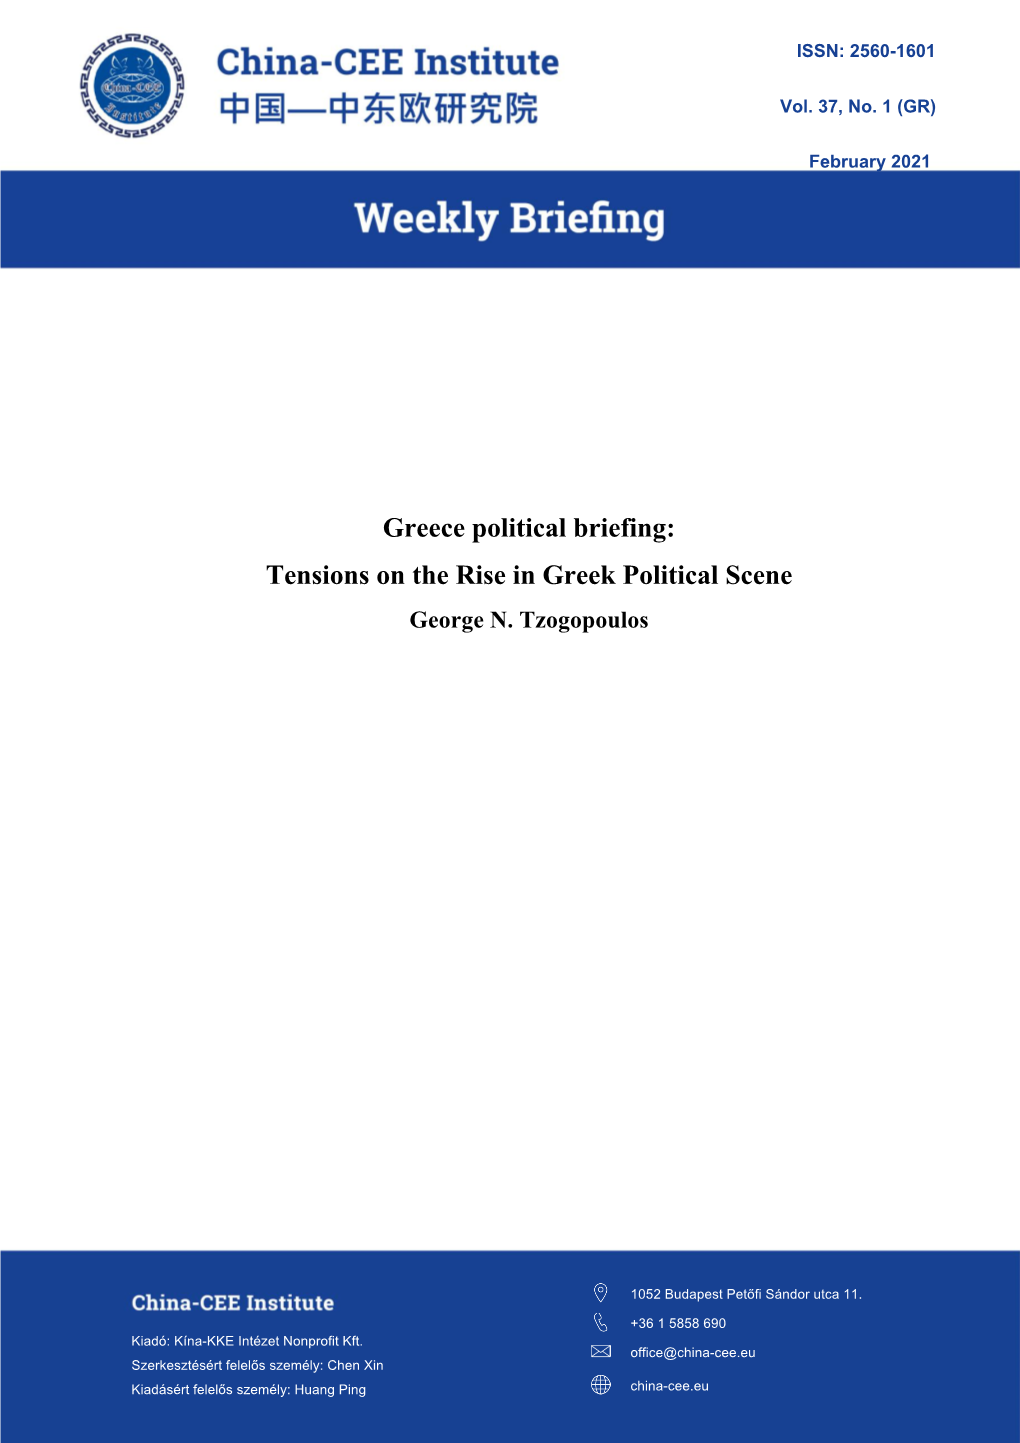 Greece Political Briefing: Tensions on the Rise in Greek Political Scene George N